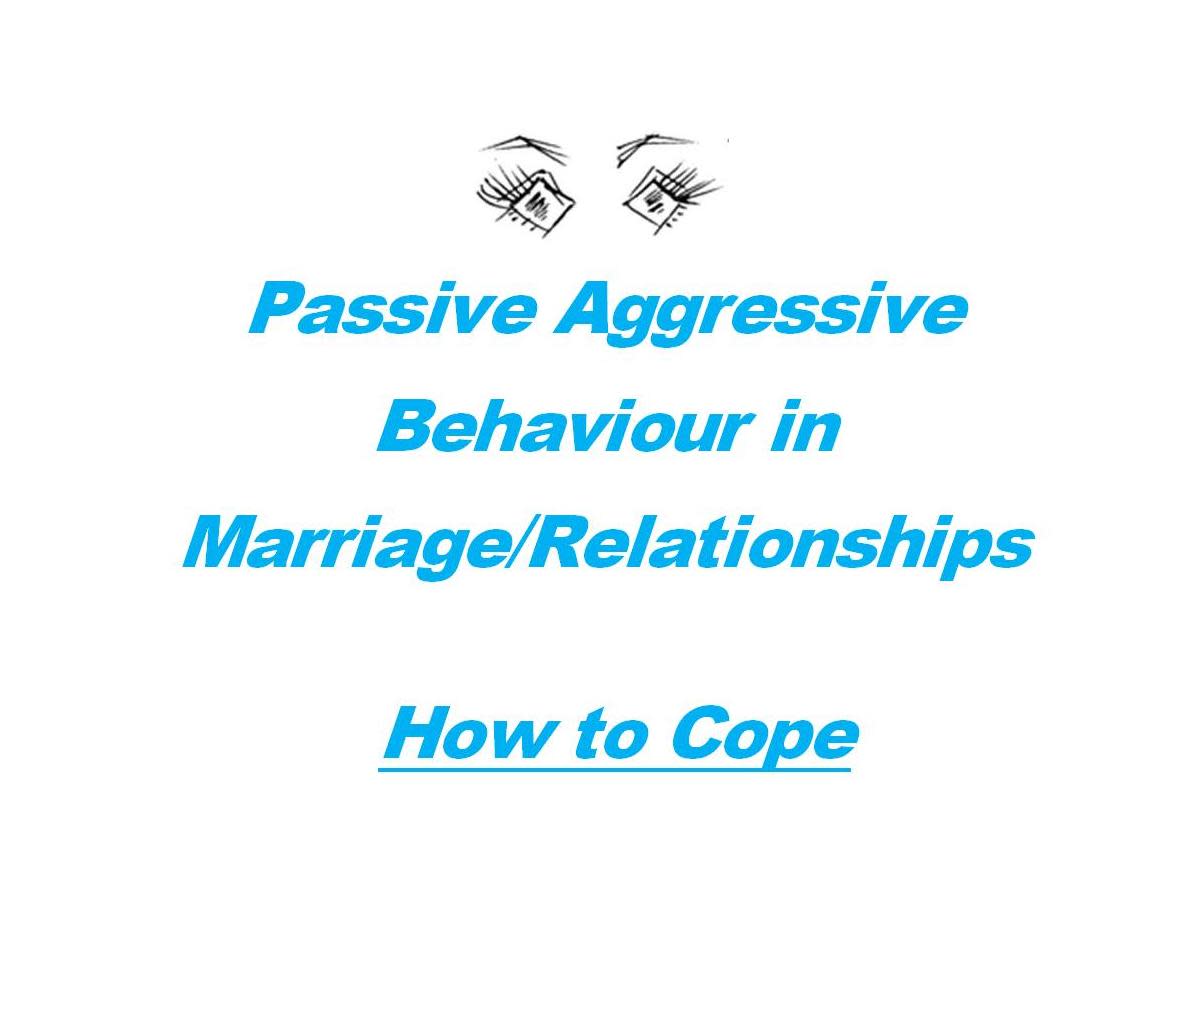 passive-aggressive-partner-is-their-behaviour-bringing-out-the-worse-in-you